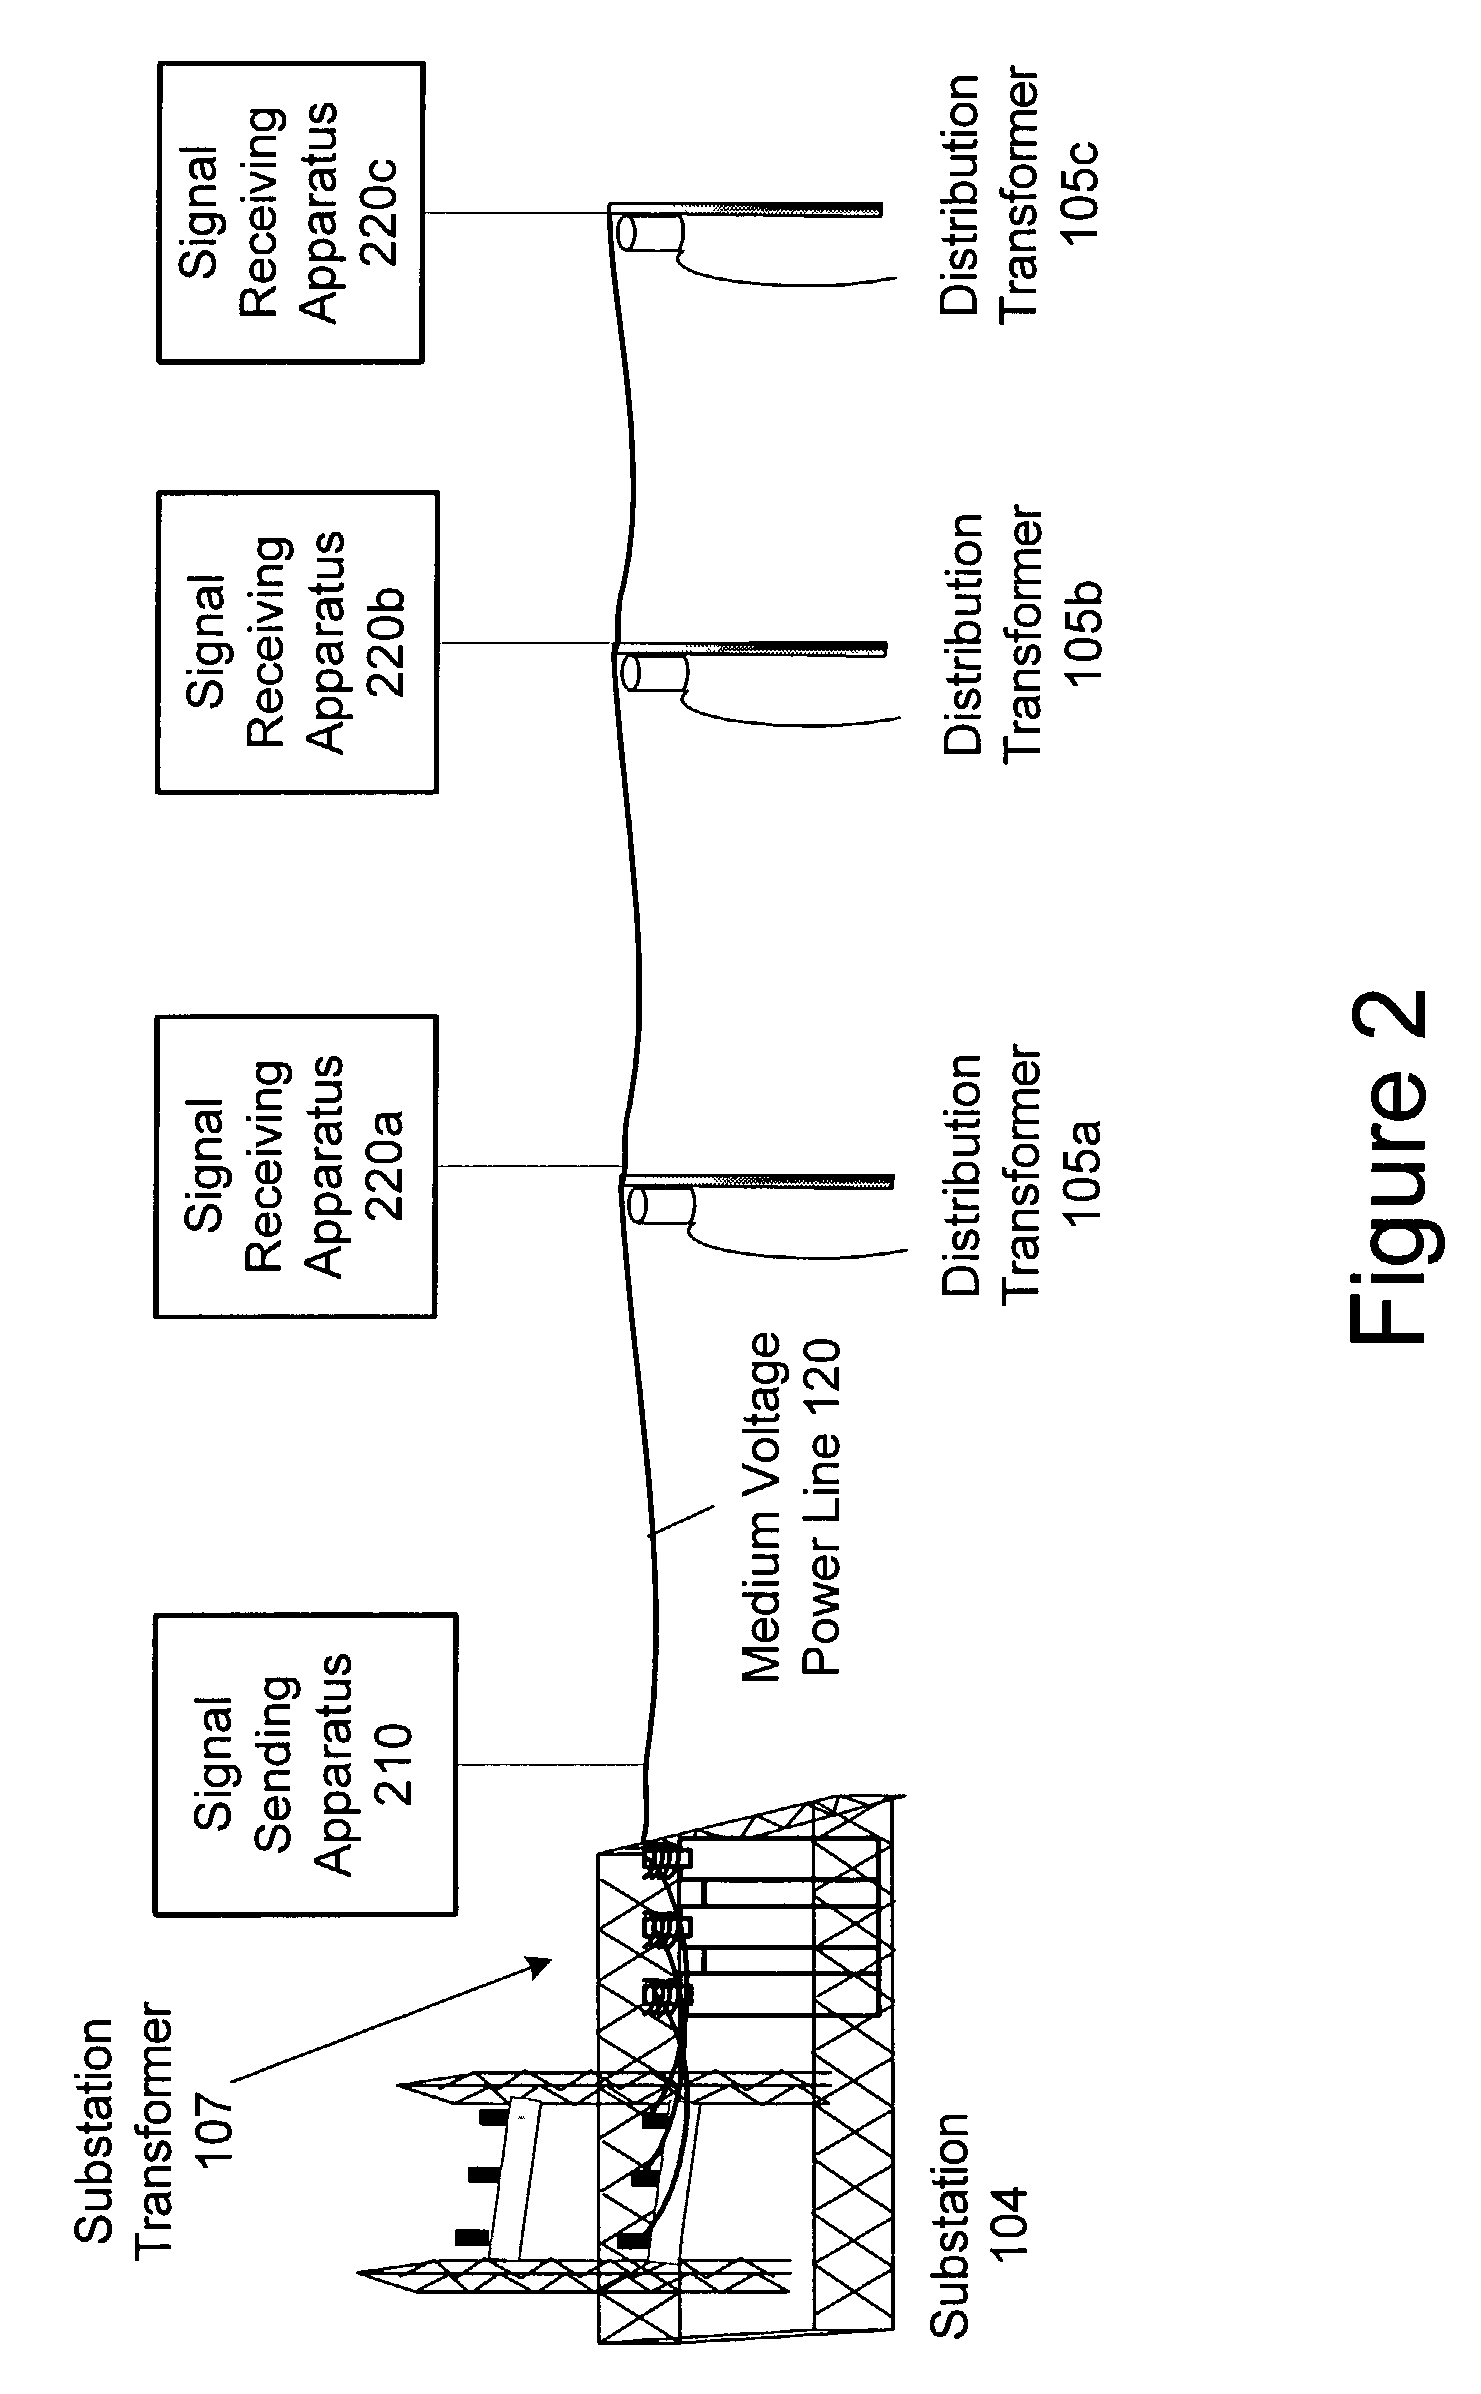 Device and method for providing power line characteristics and diagnostics